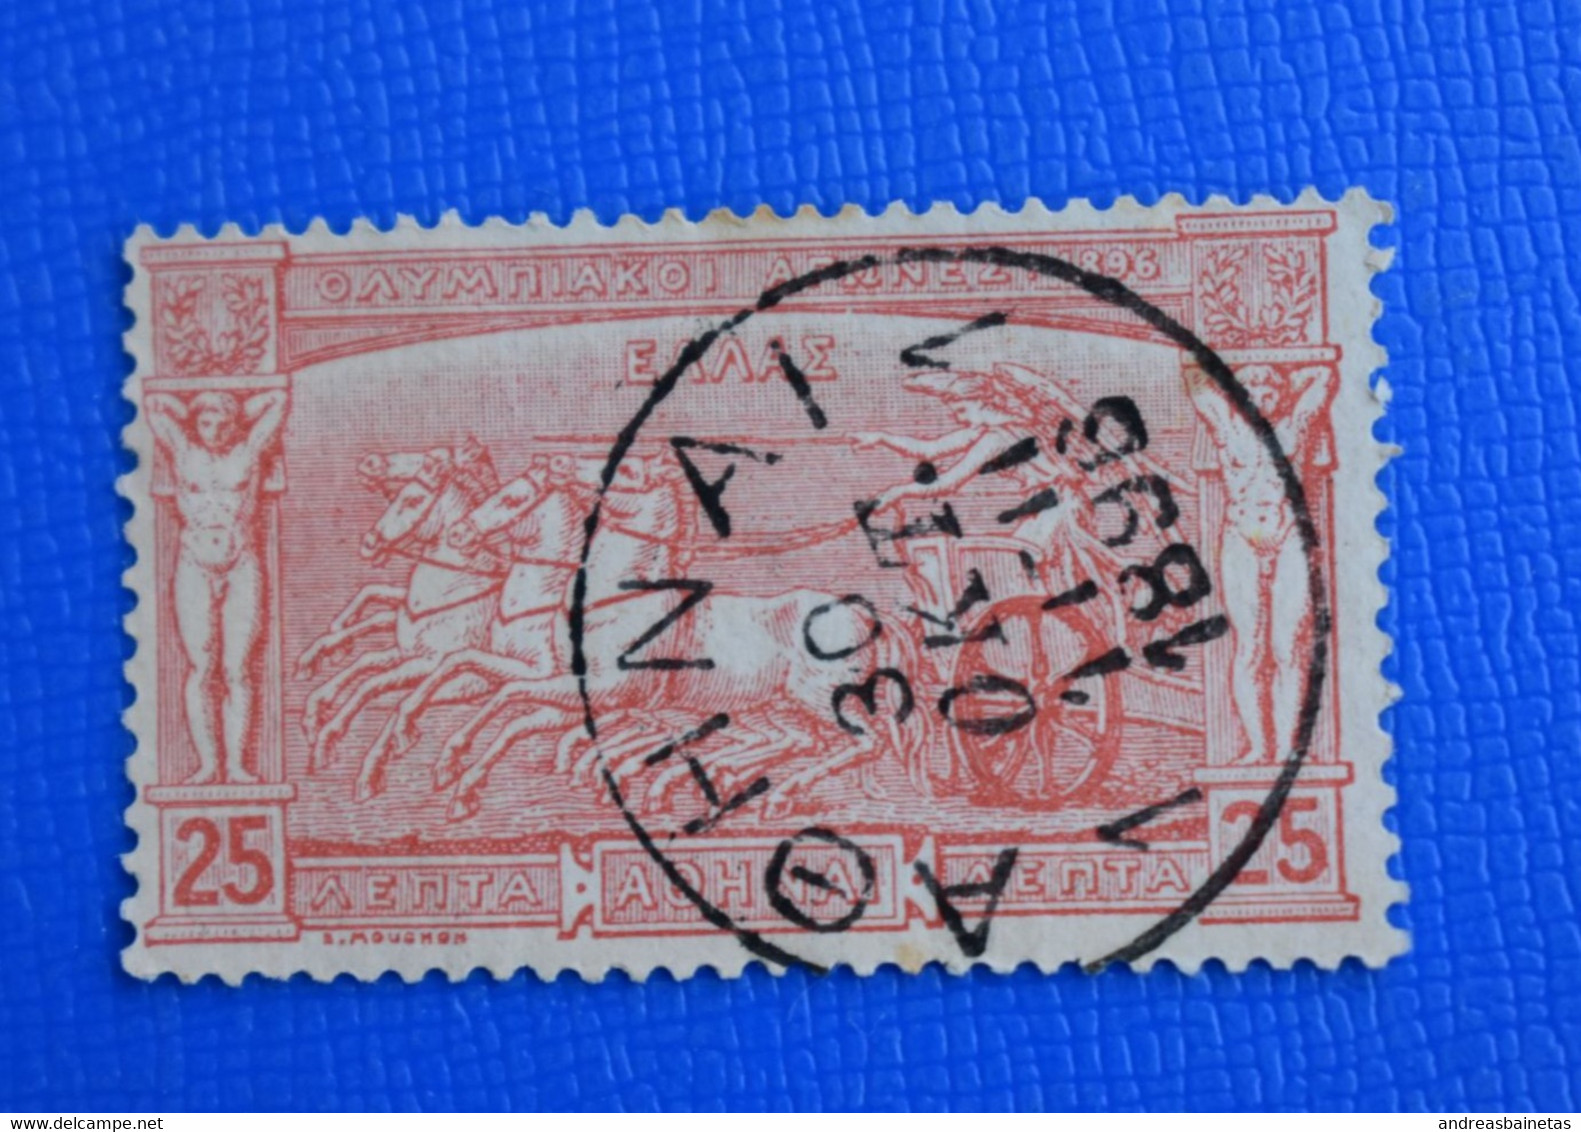 Stamps GREECE 1896 The 1st Modern Olympic Games 	25L 30/10/1896 ΑΘΗΝΑΙ Used - Usati